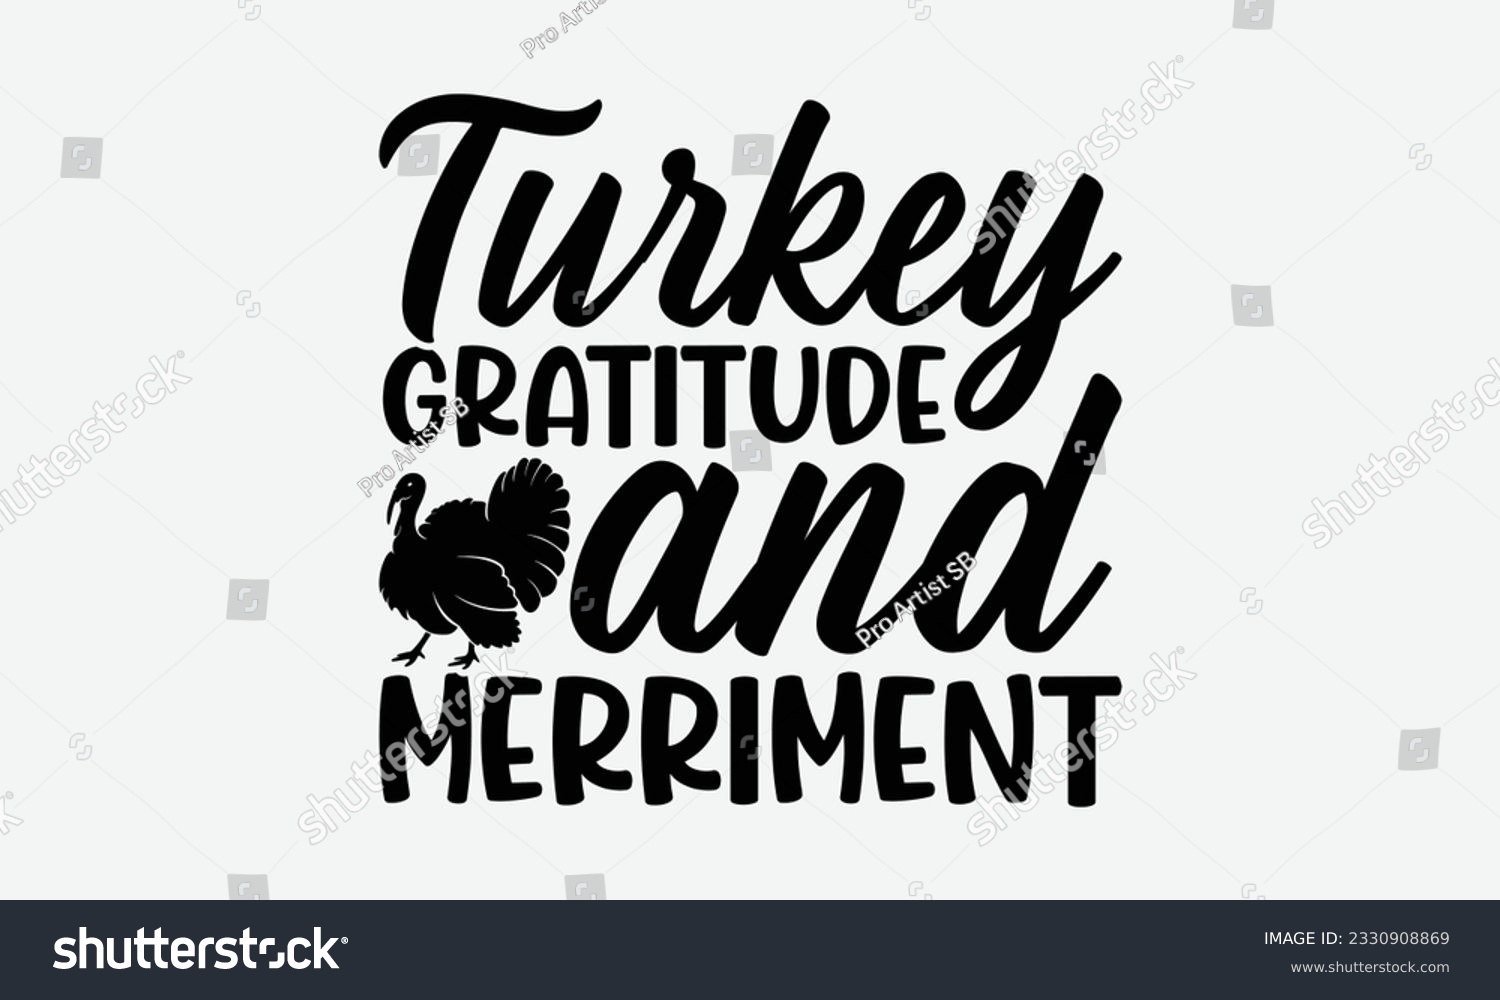 SVG of Turkey Gratitude And Merriment - Thanksgiving T-shirt Design Template, Happy Turkey Day SVG Quotes, Hand Drawn Lettering Phrase Isolated On White Background. svg